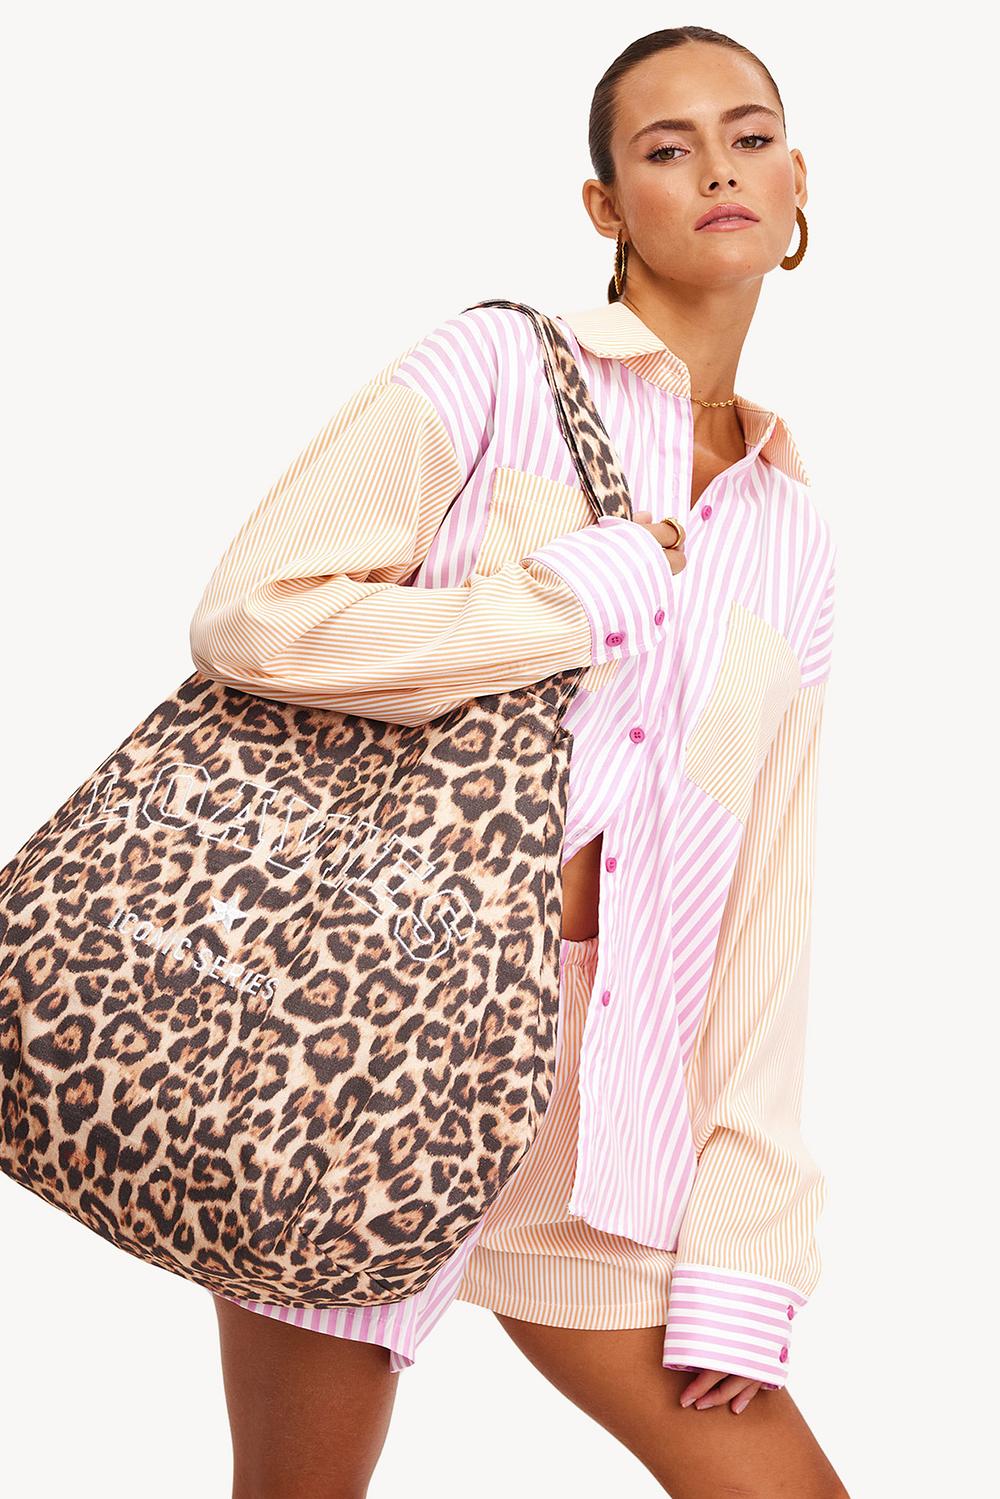 Brown beach totebag with leopard print